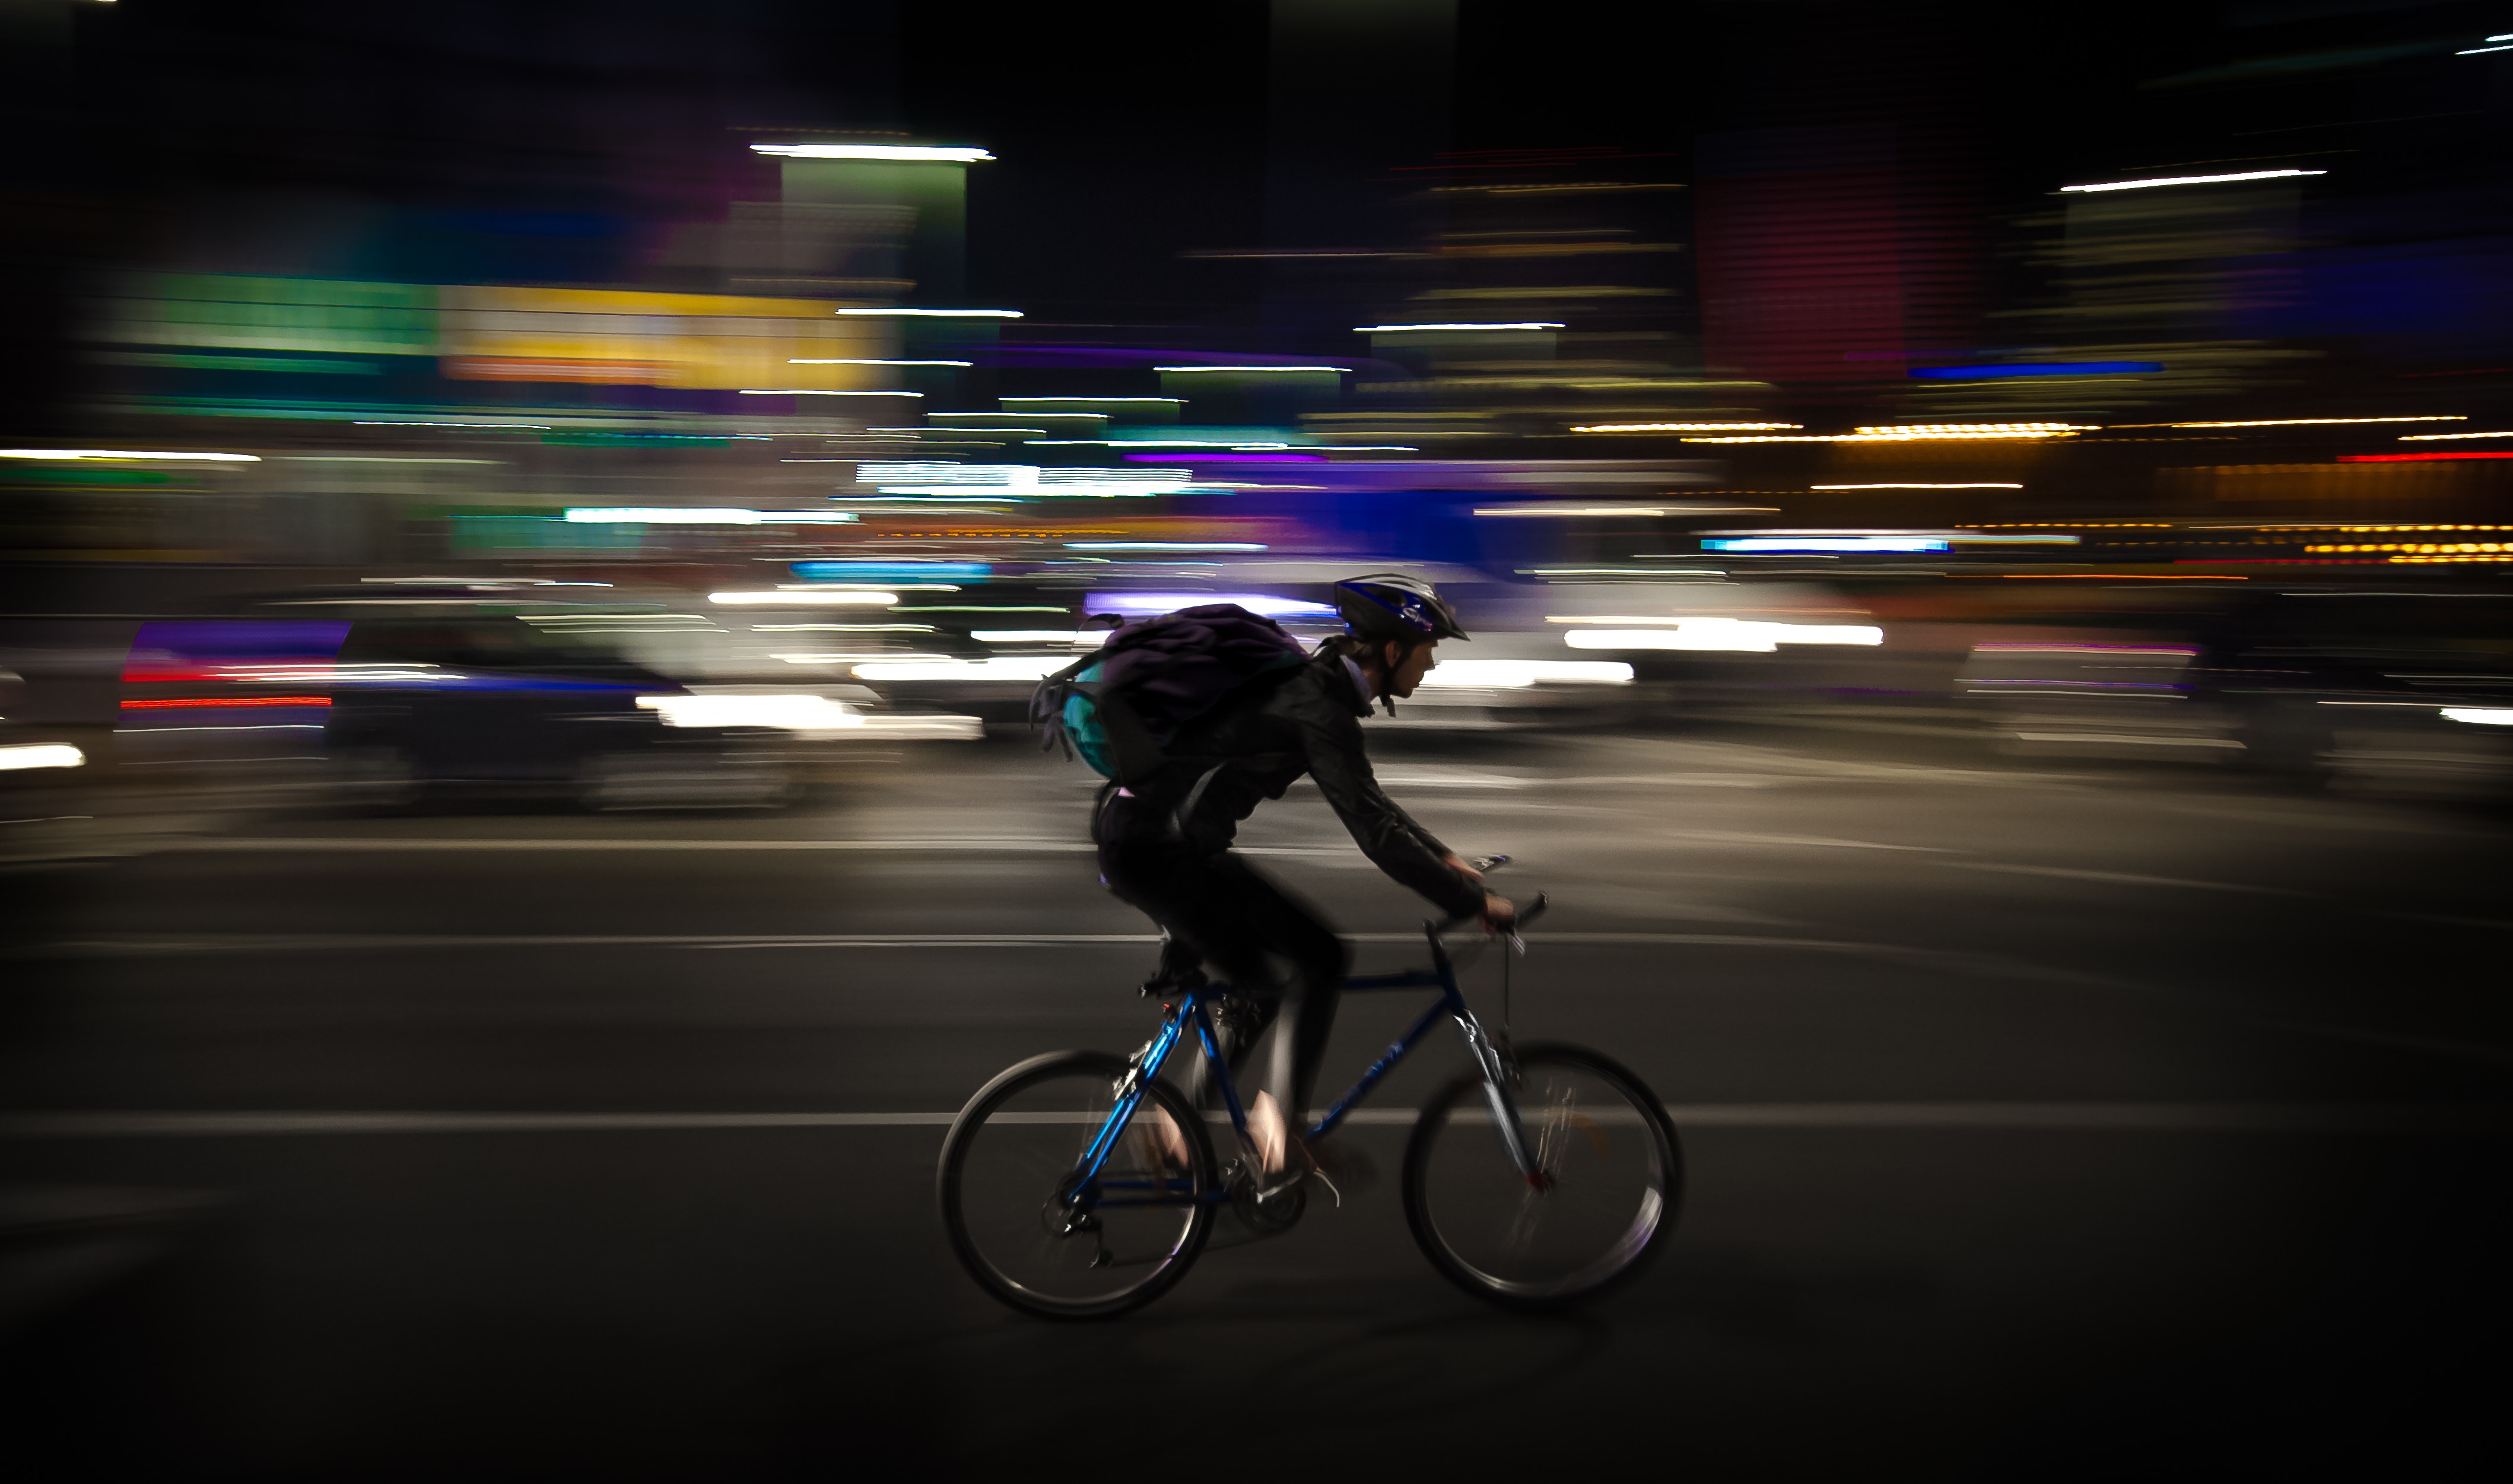 A man wearing a helmet and a green backpack rides his bike through a brightly lit city at night, the lights blurring and blending behind him as he rides along the street.